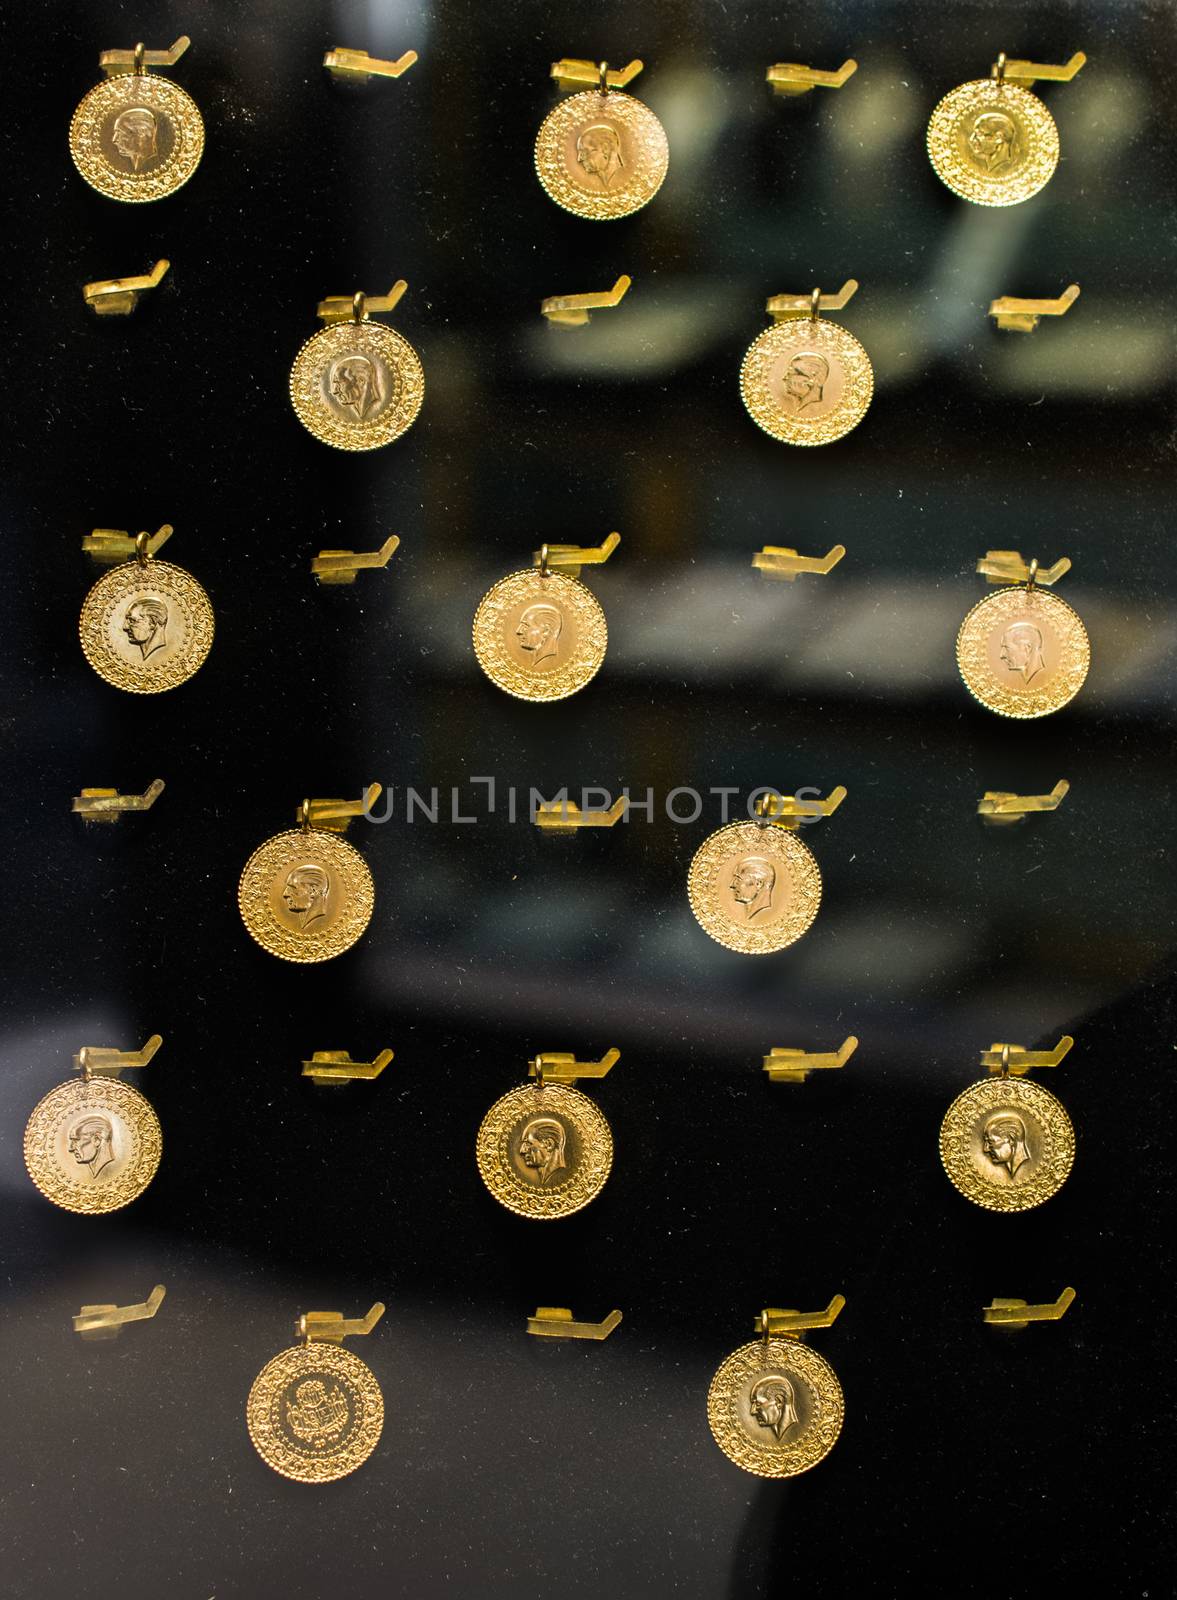 Plenty of geniune gold coins are in the view